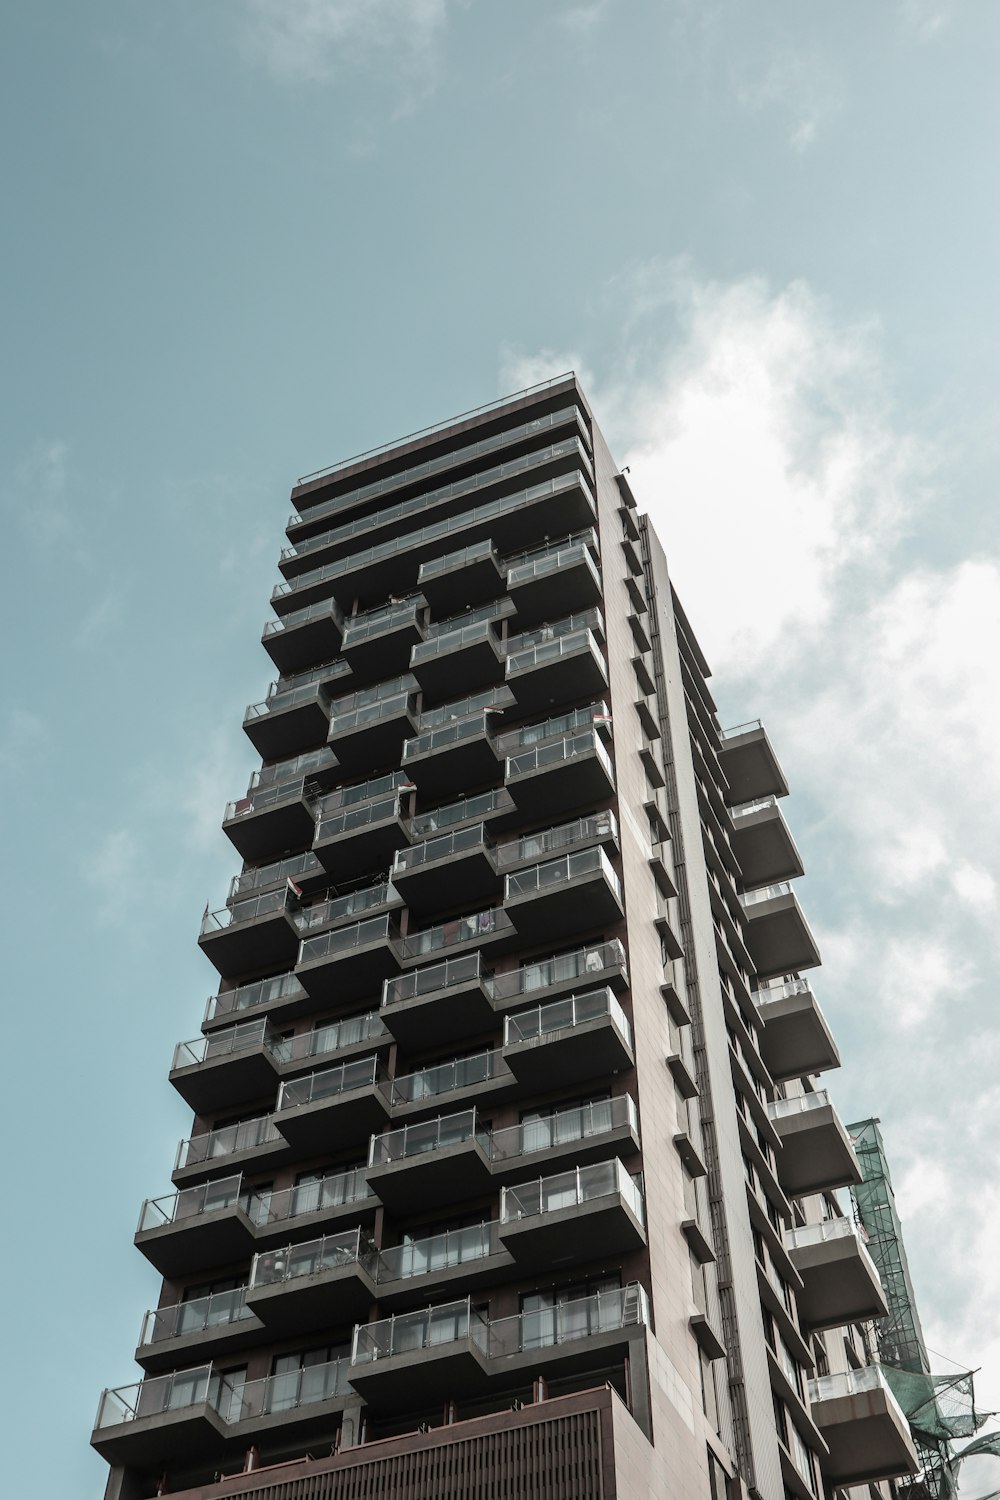 a tall building with balconies and balconies on it